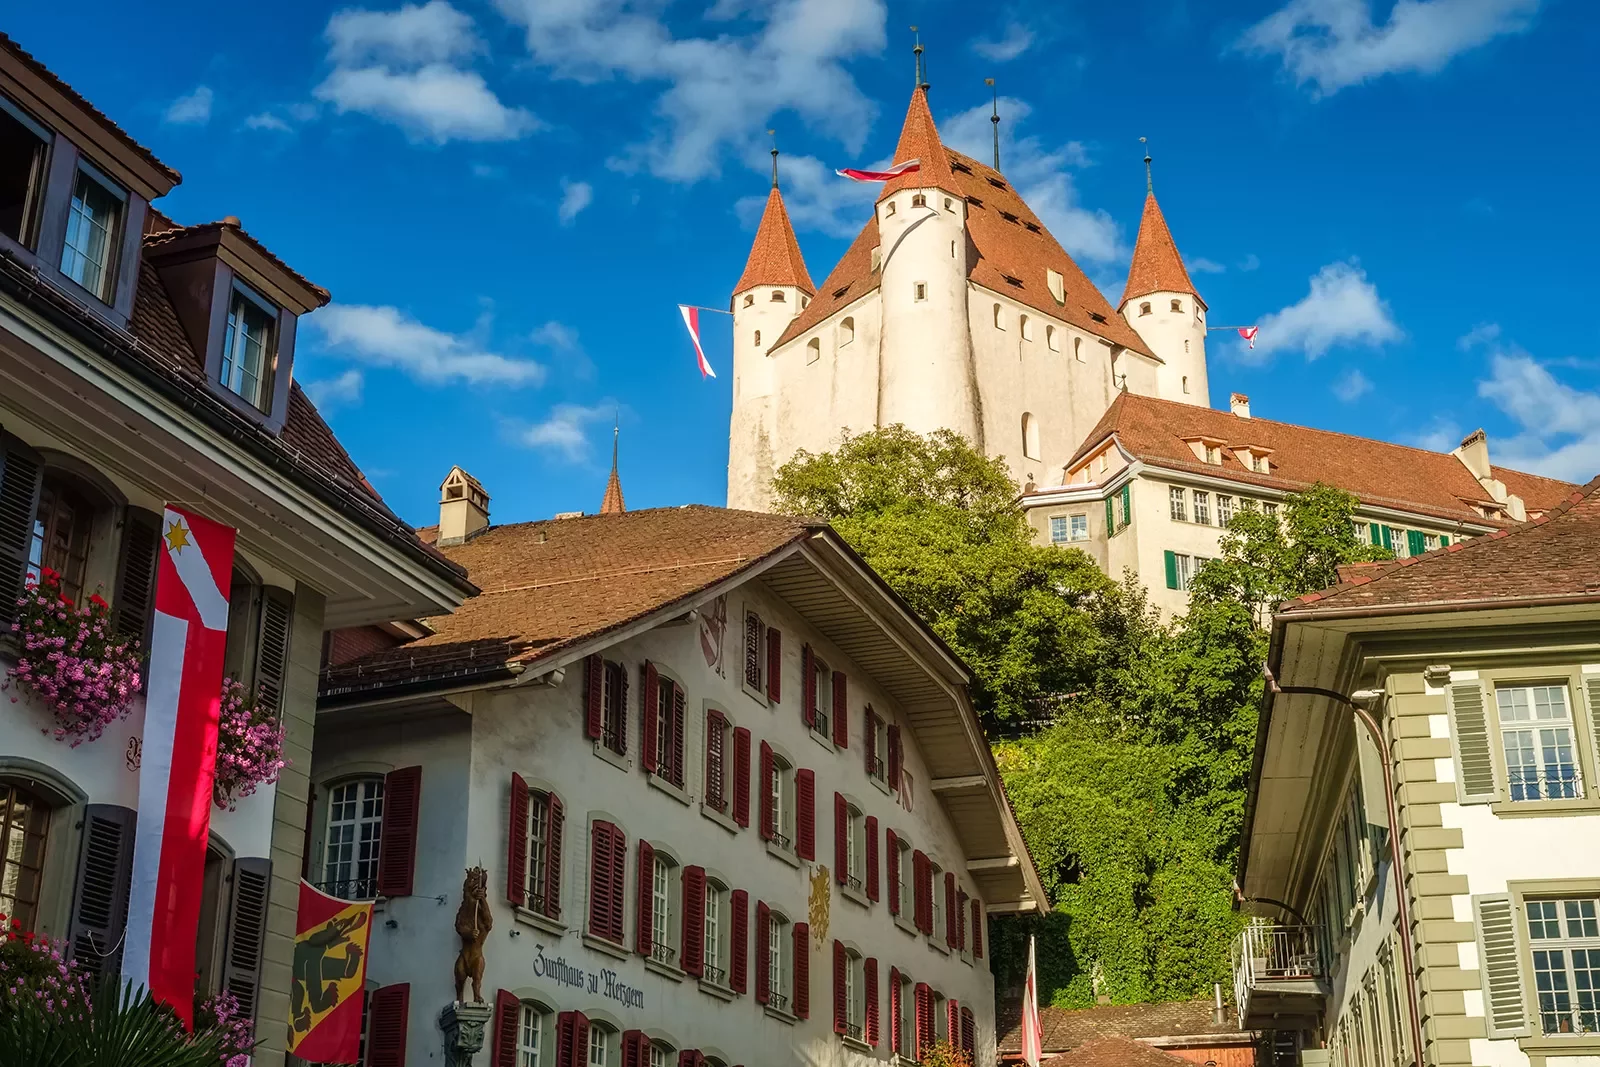 Ground-angle shot of Thun Castle, German architecture all around.